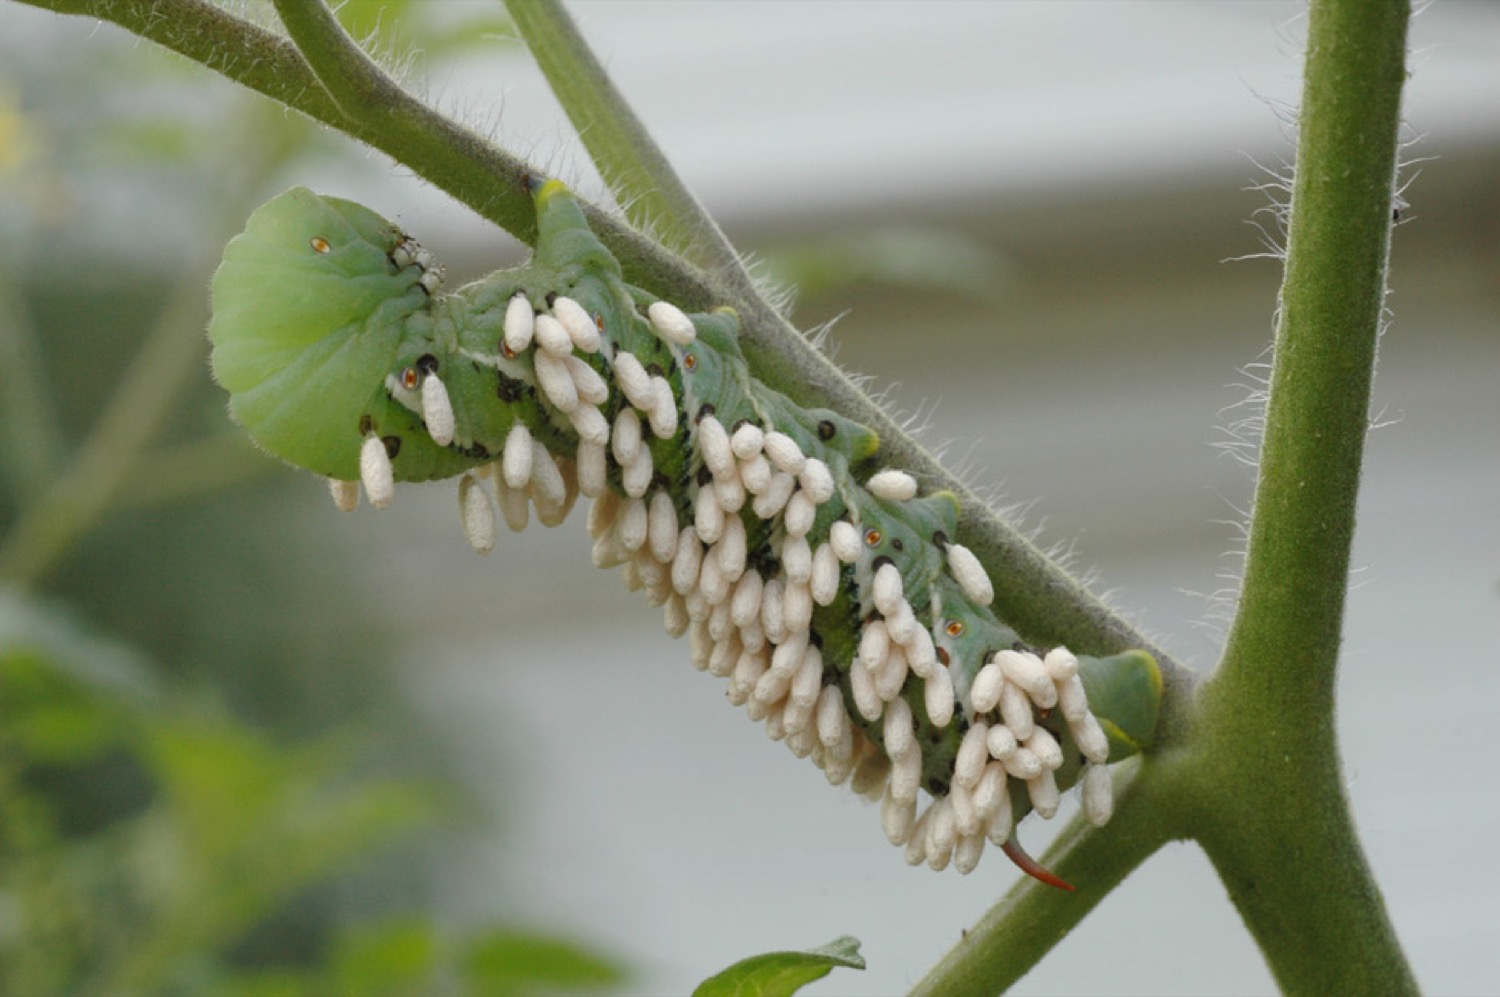 a green caterpillar on a branch with a bunch of white eggs hanging from its back